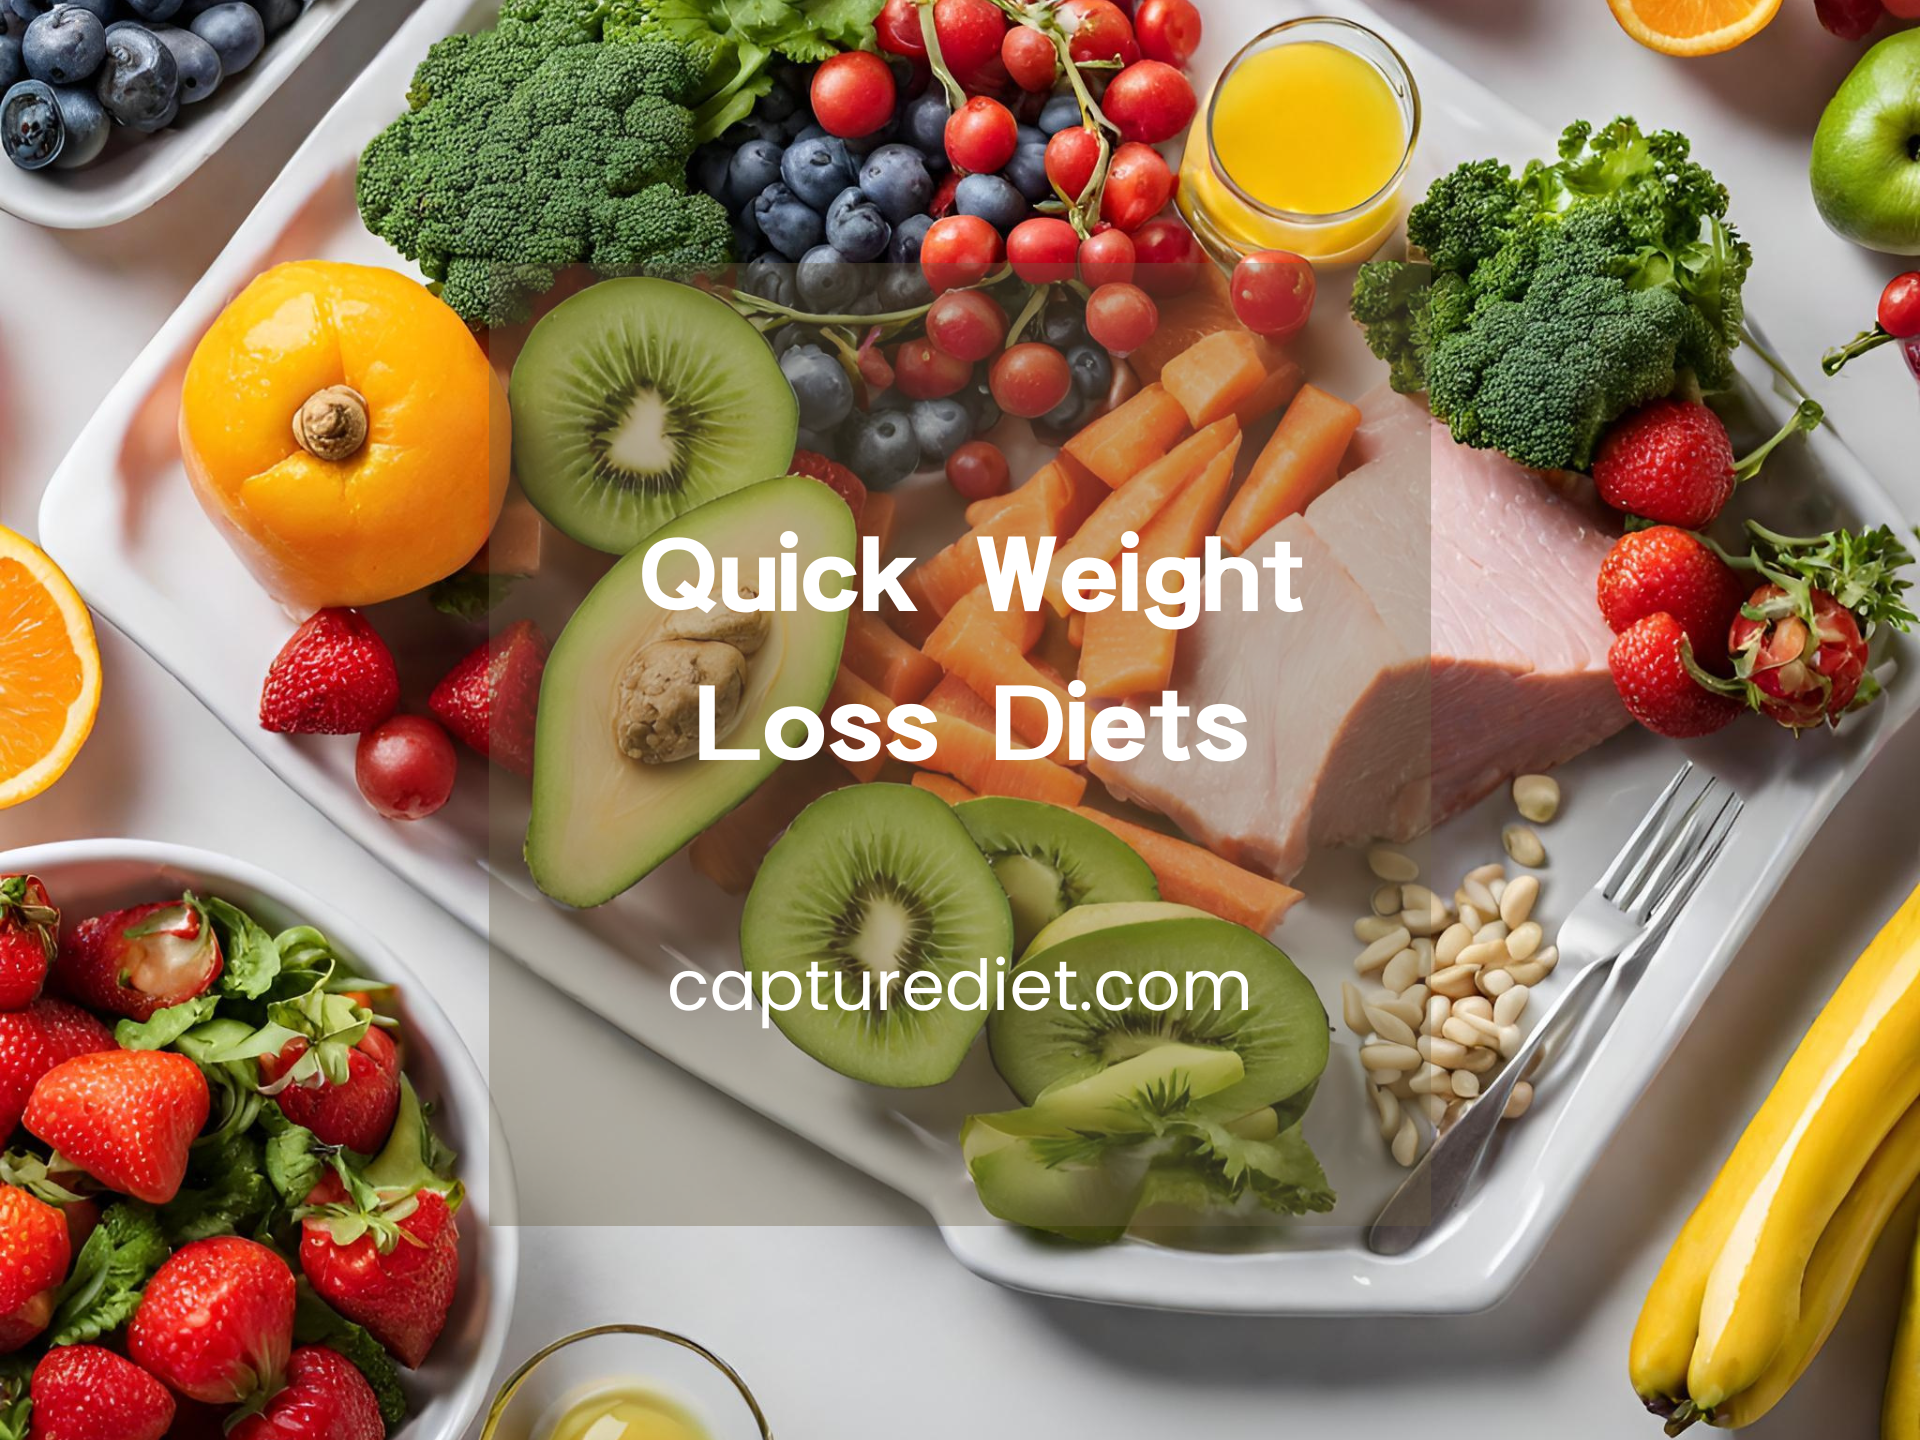 Quick Weight Loss Diets: Top 10 Power Tips